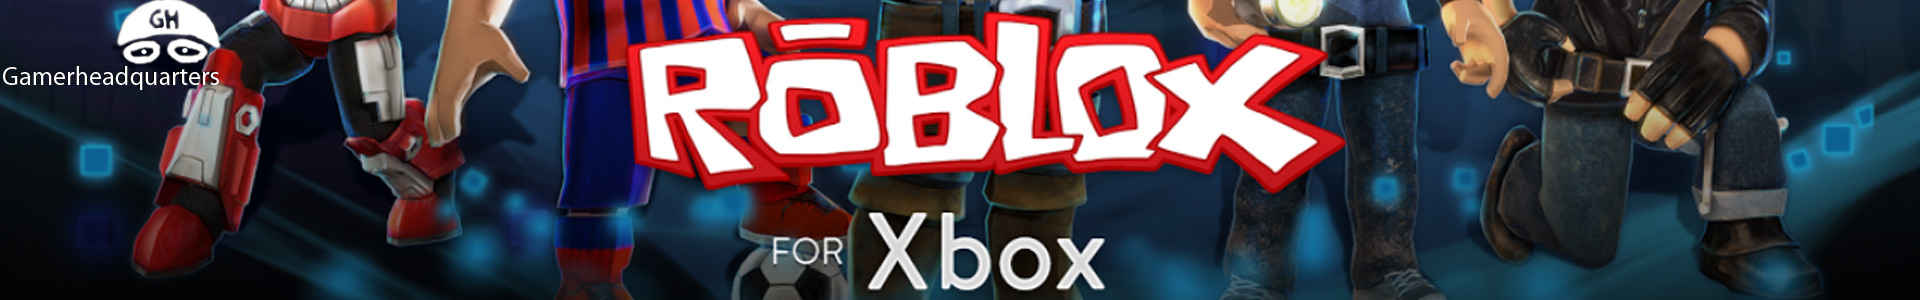 Roblox Xbox One Games List Gamerheadquarters - roblox games on xbox one